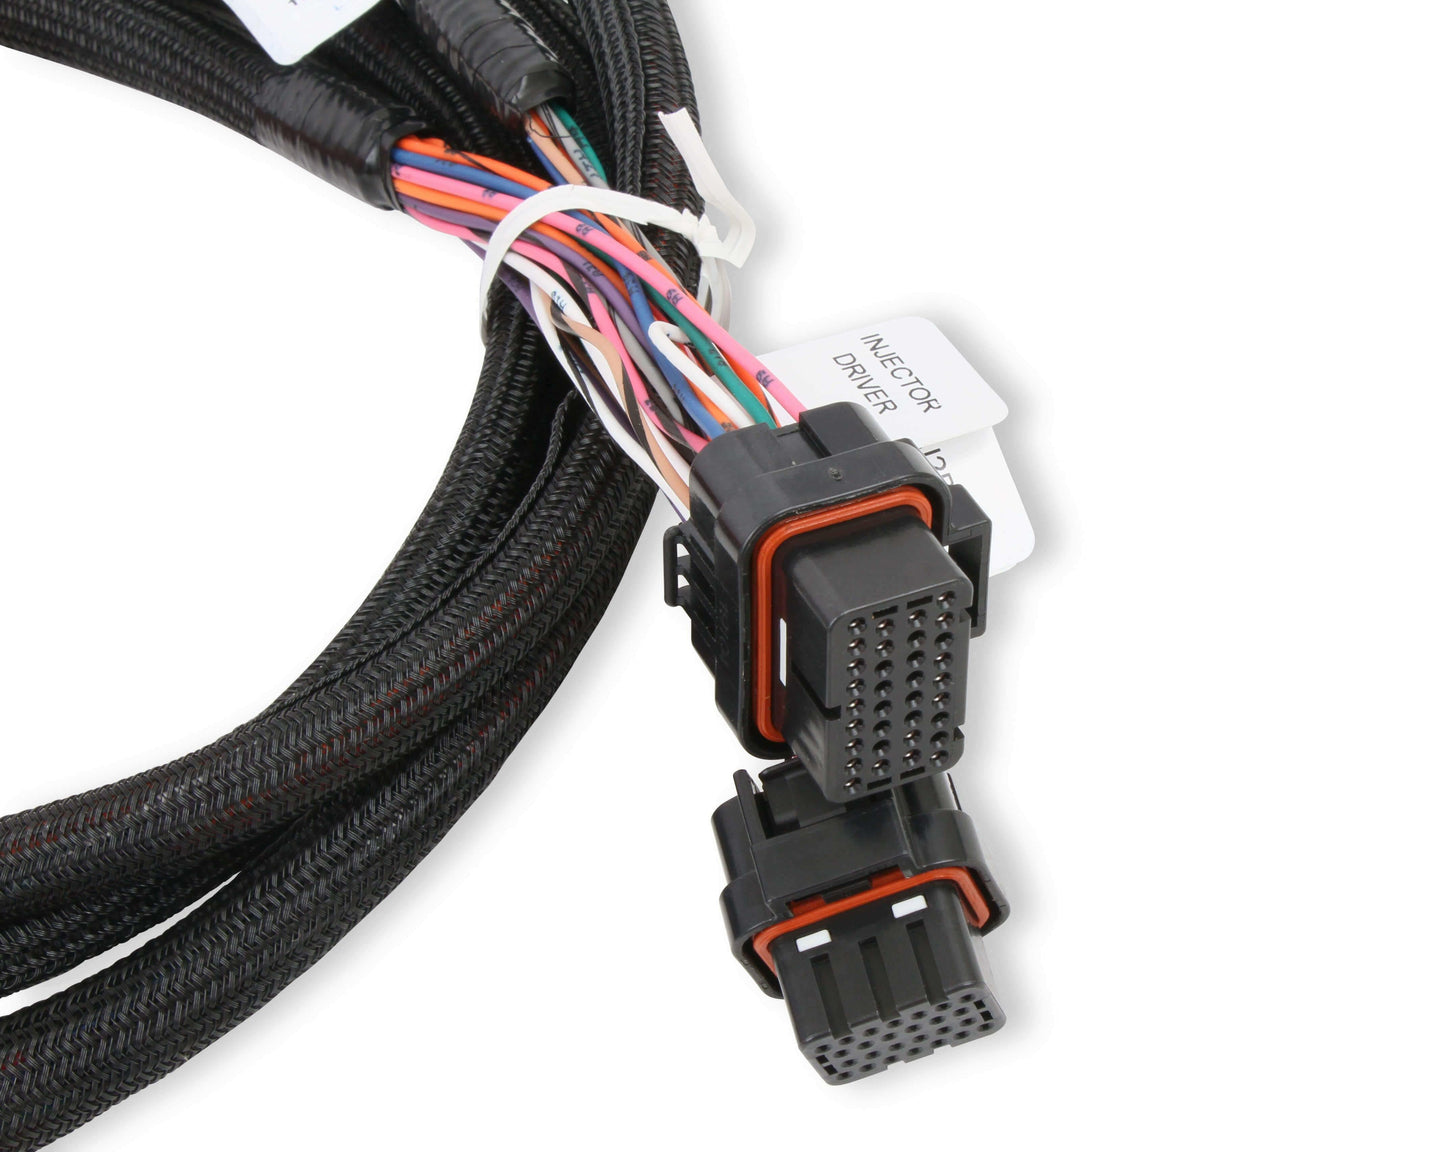 Injector Driver Harness - 558-219